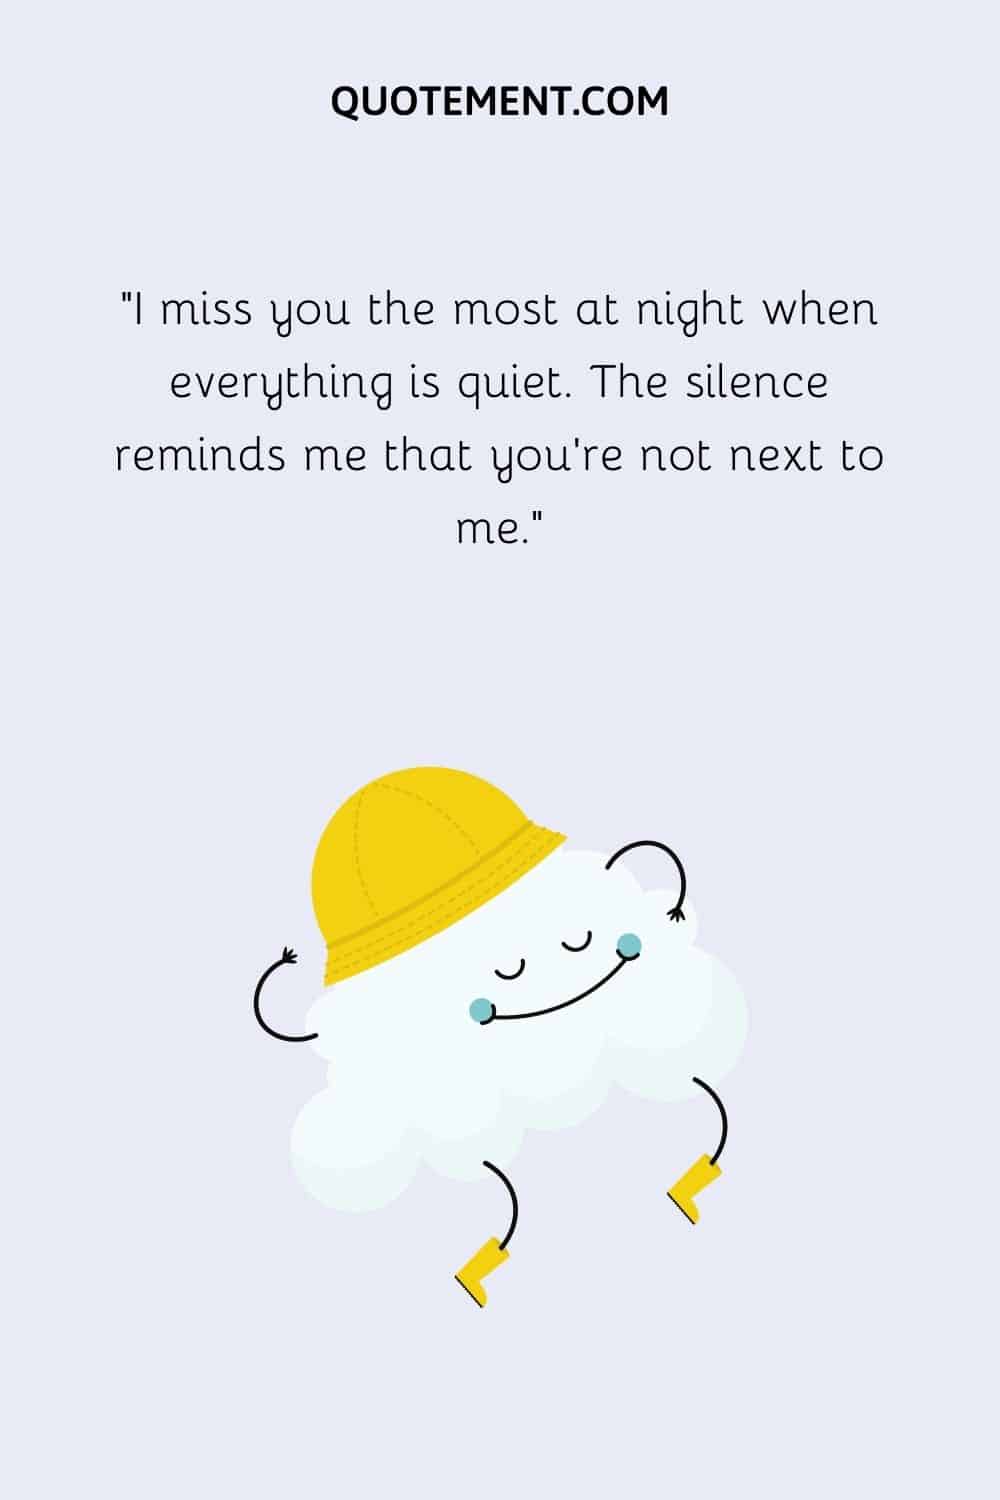 I miss you the most at night when everything is quiet.